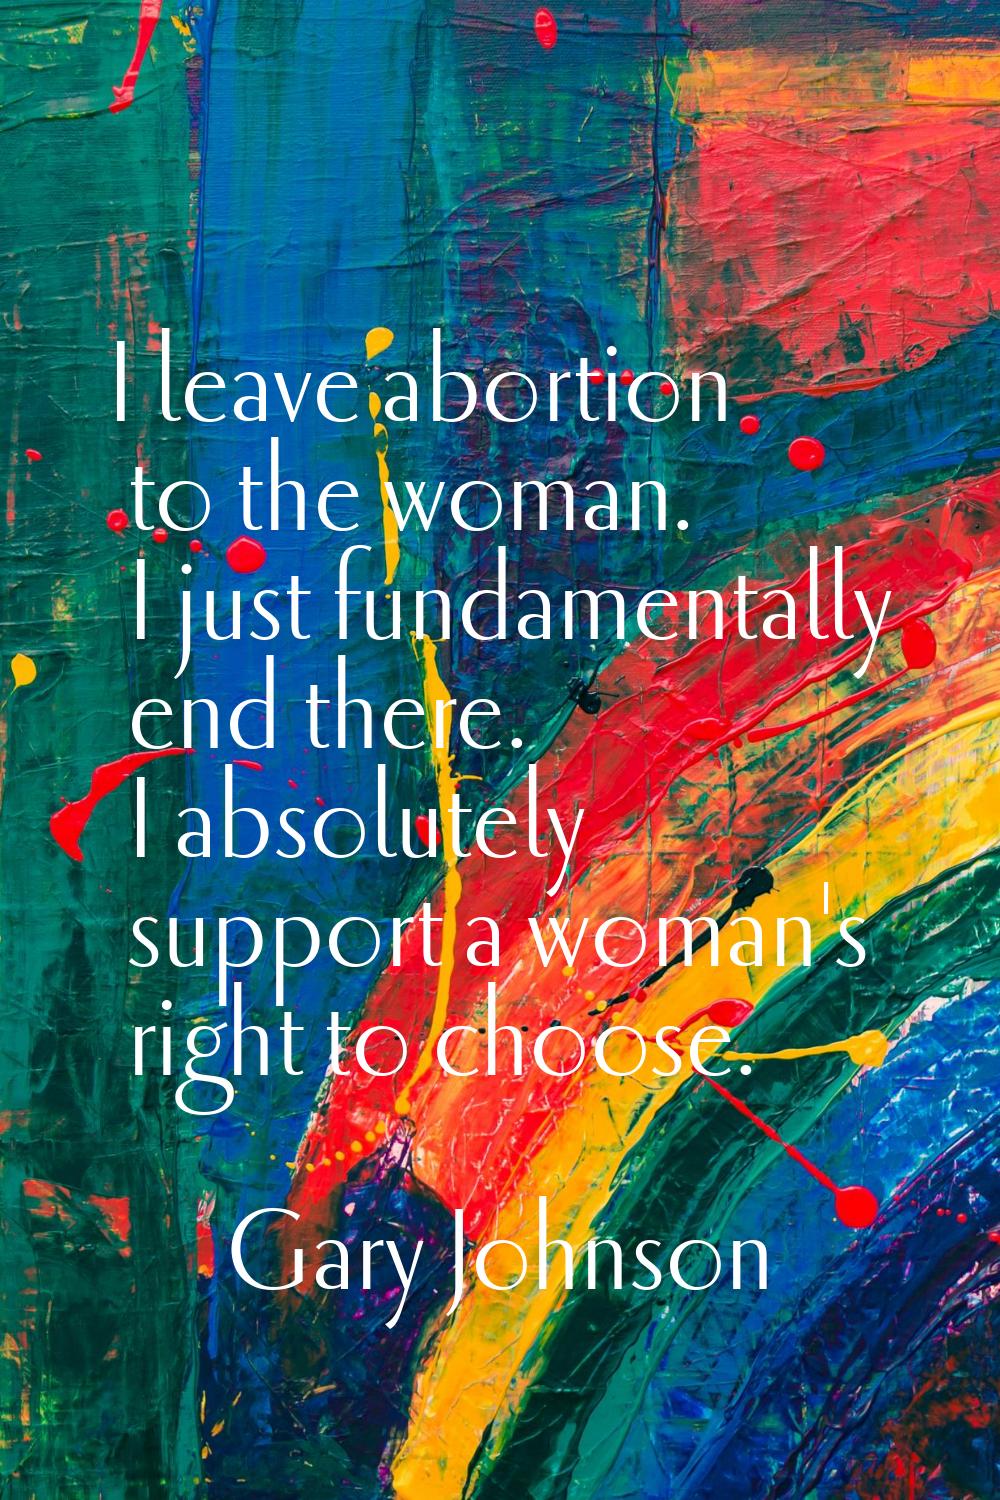 I leave abortion to the woman. I just fundamentally end there. I absolutely support a woman's right